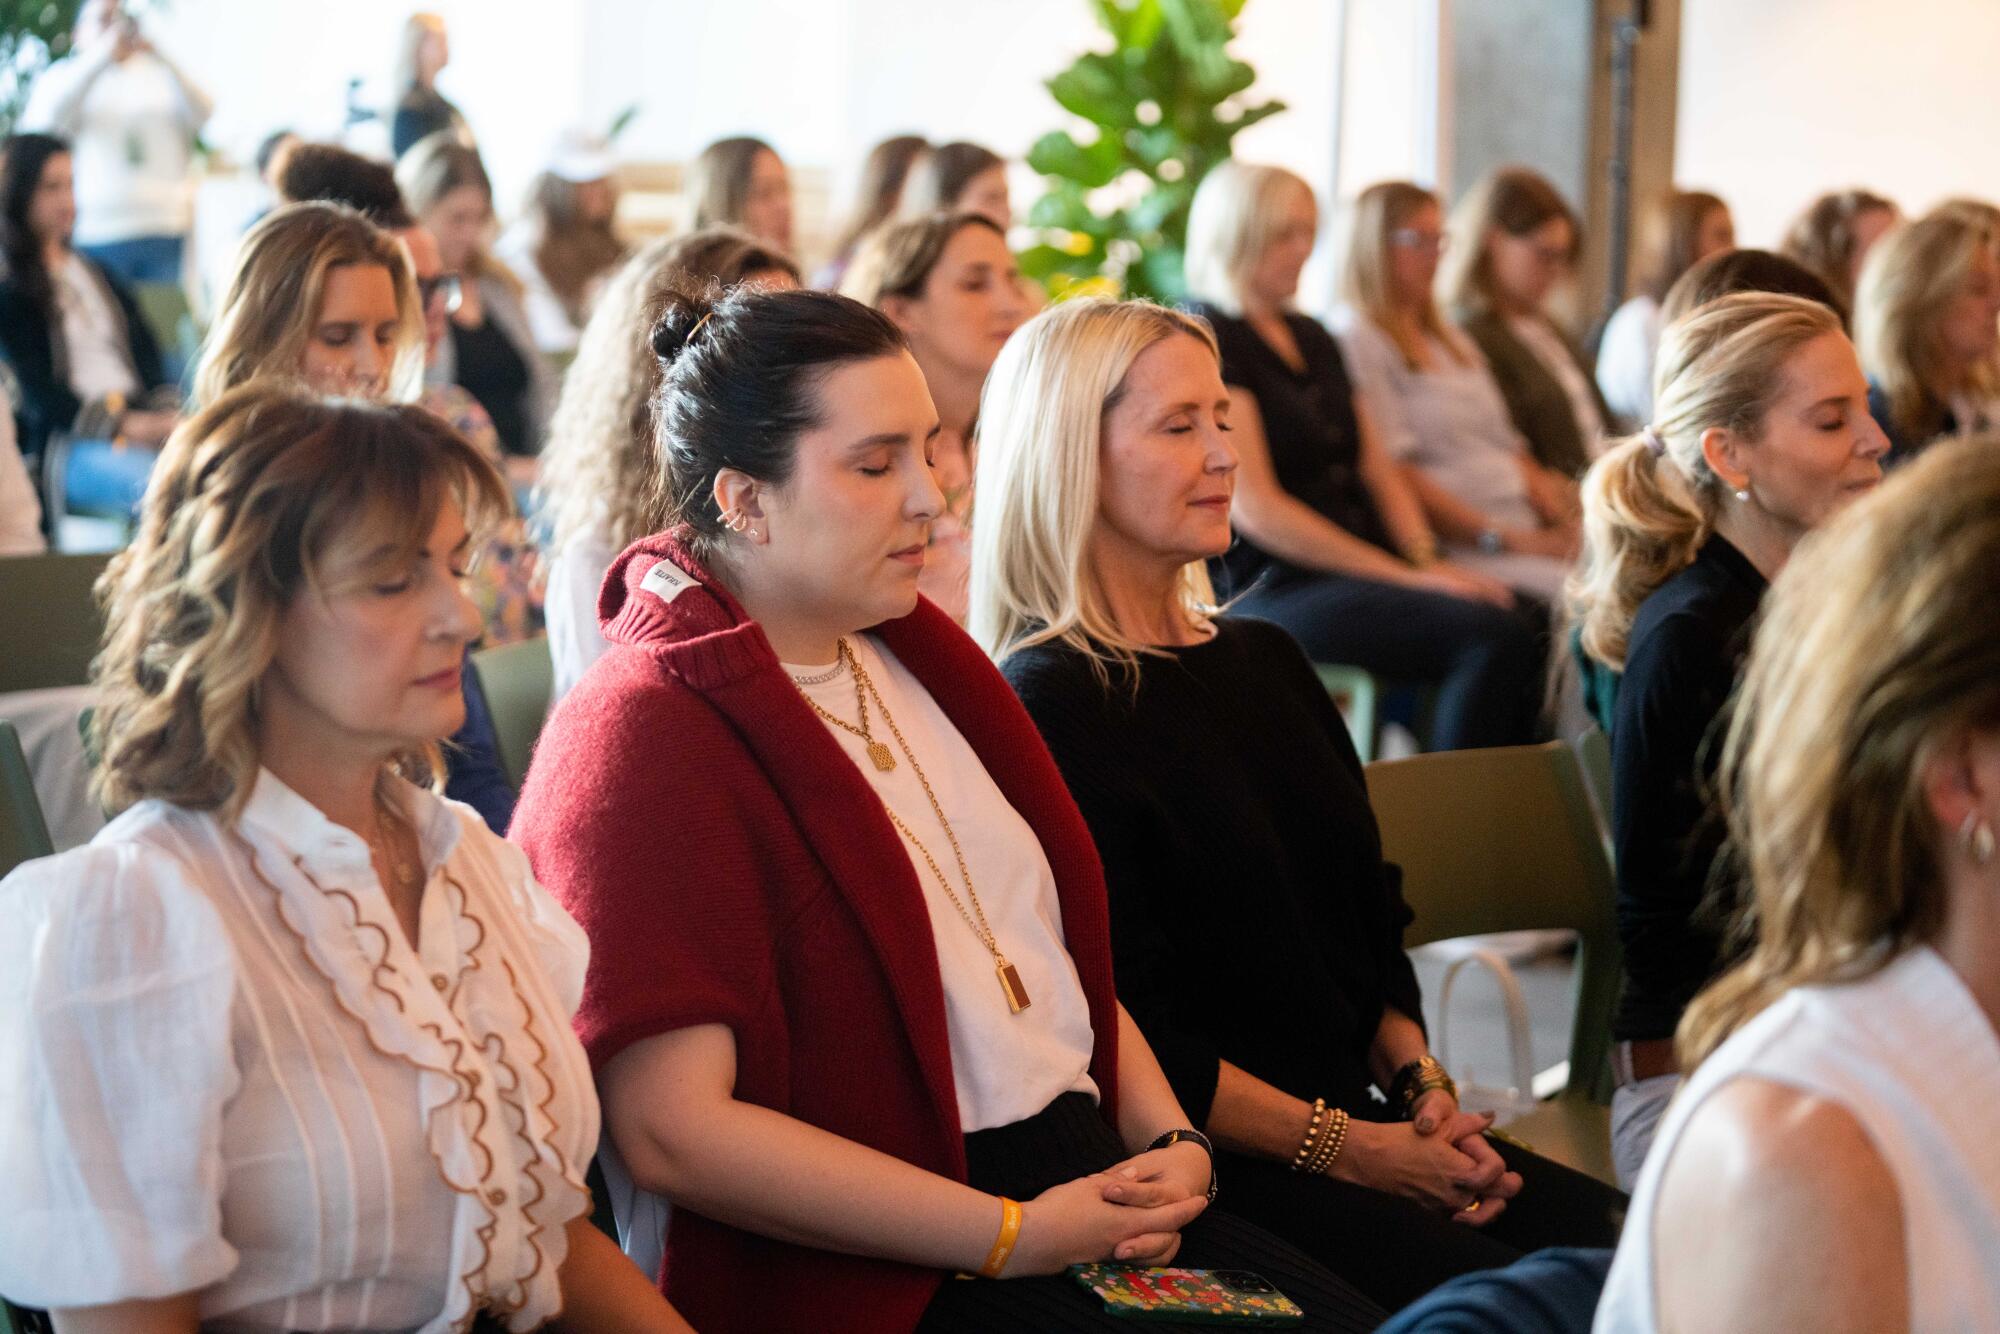 The crowd meditates at the Goop Immersive event in Santa Monica.